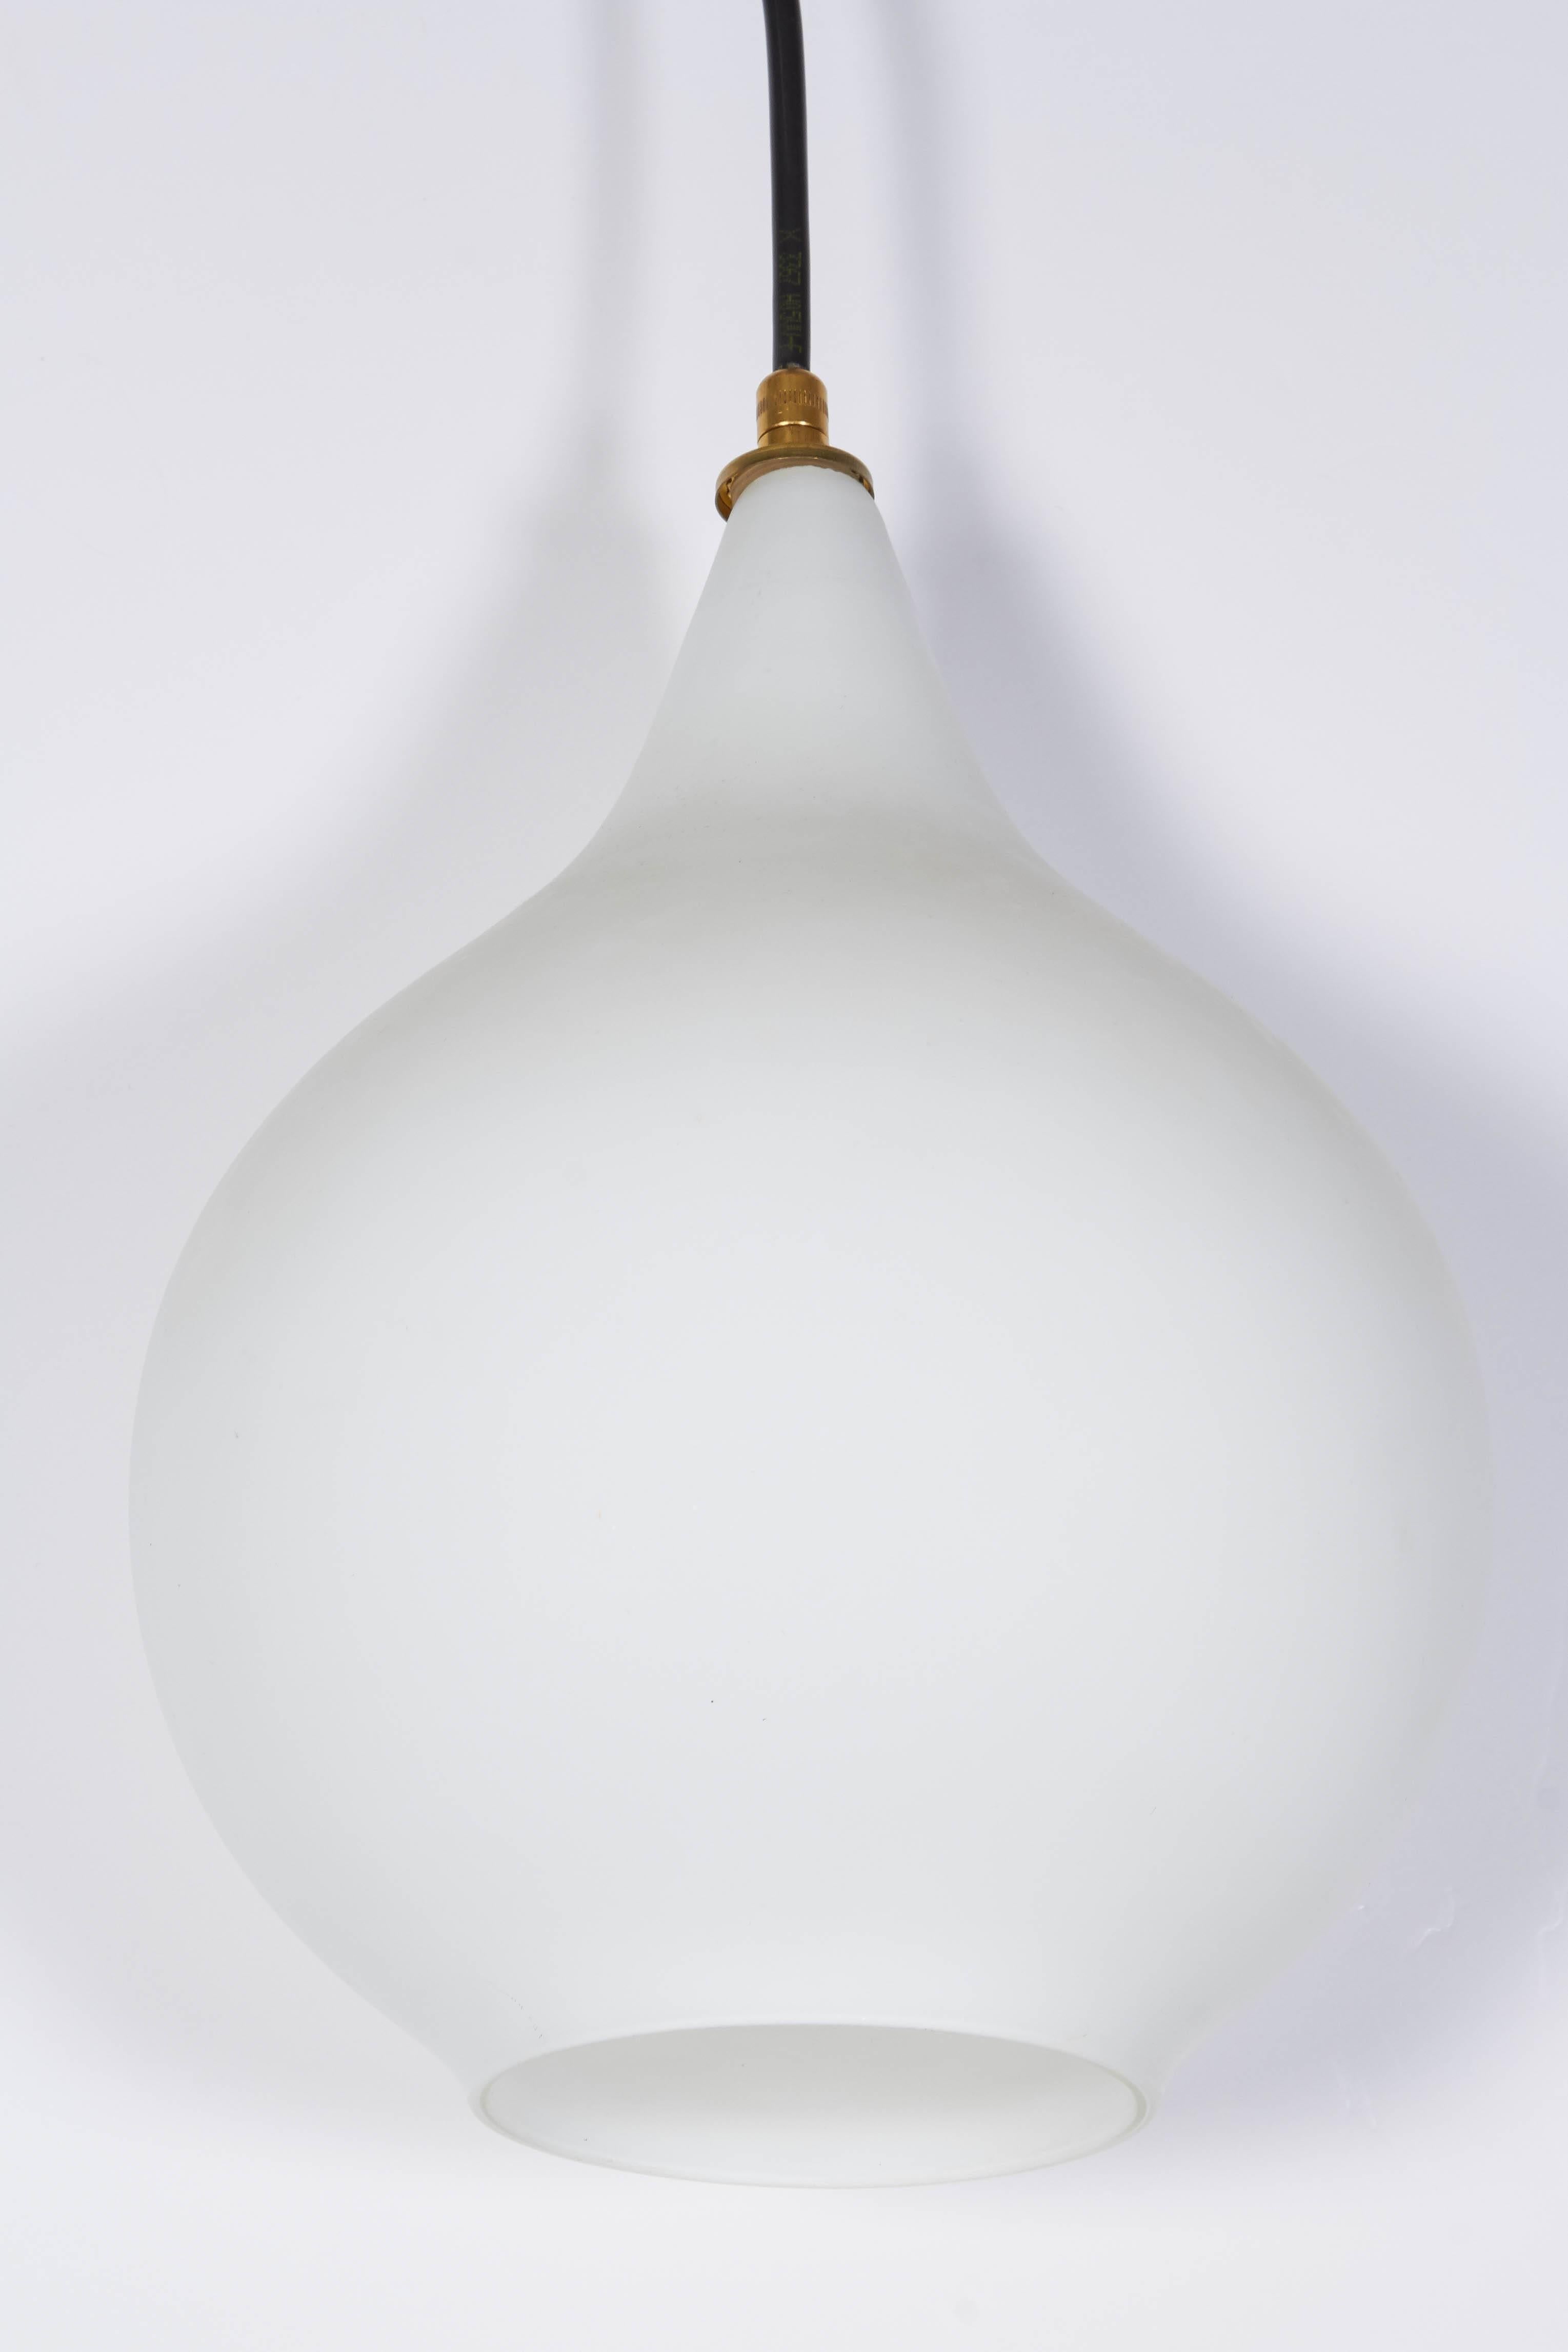 Italian handblown pendant light, circa 1950. Glass shade is layered with a clear satin finished over white in a tear drop shape. Holds one standard light bulb. Shade is 8